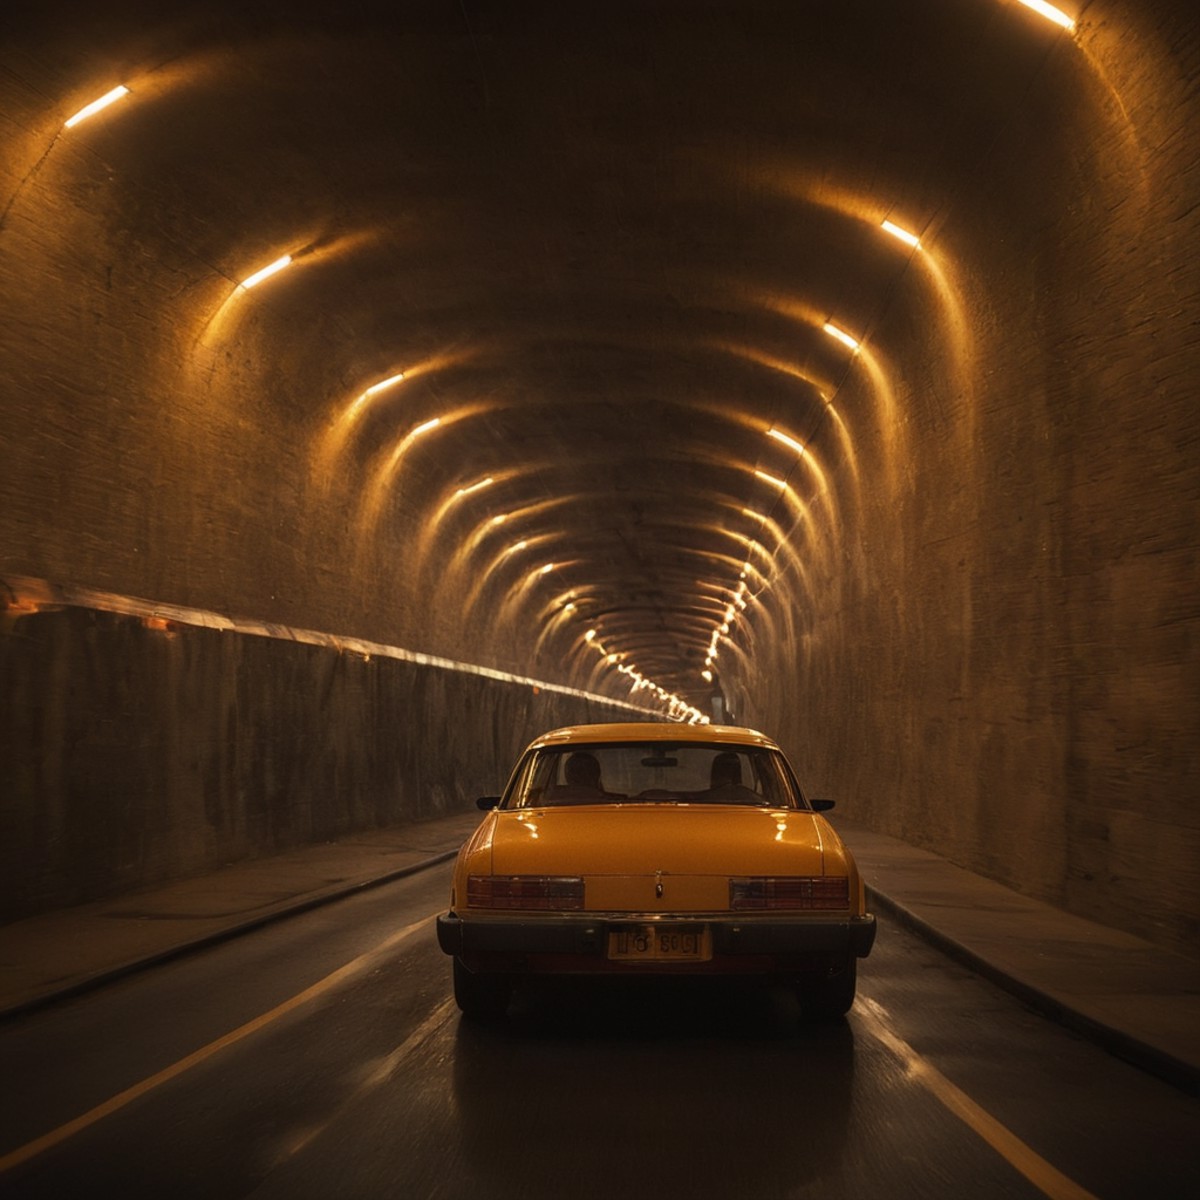 cinematic film still of  <lora:Warm Lighting Style:1>
warm light,a car driving through a tunnel with lights on,warm lighti...